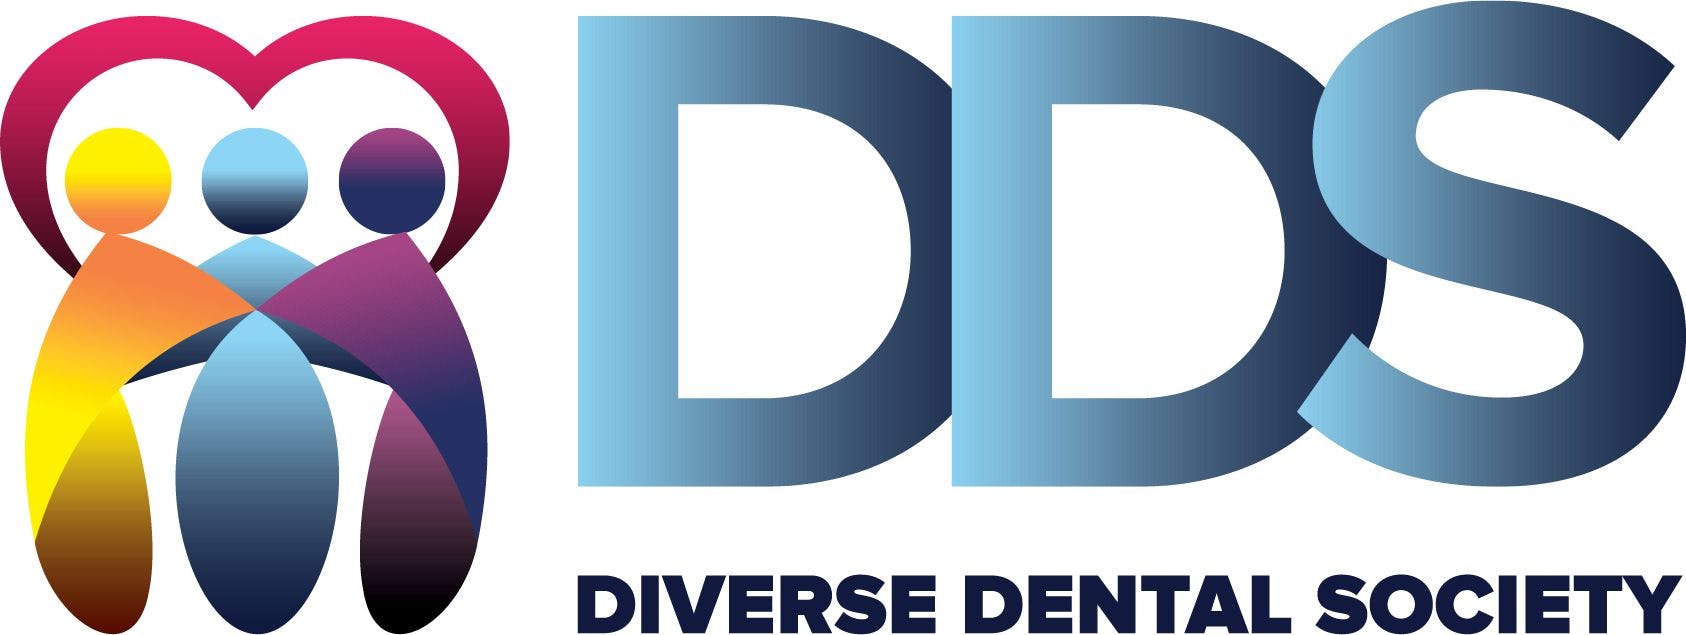  Diverse Dental Society Made Up of 3 Minority Oral Health Professional Groups